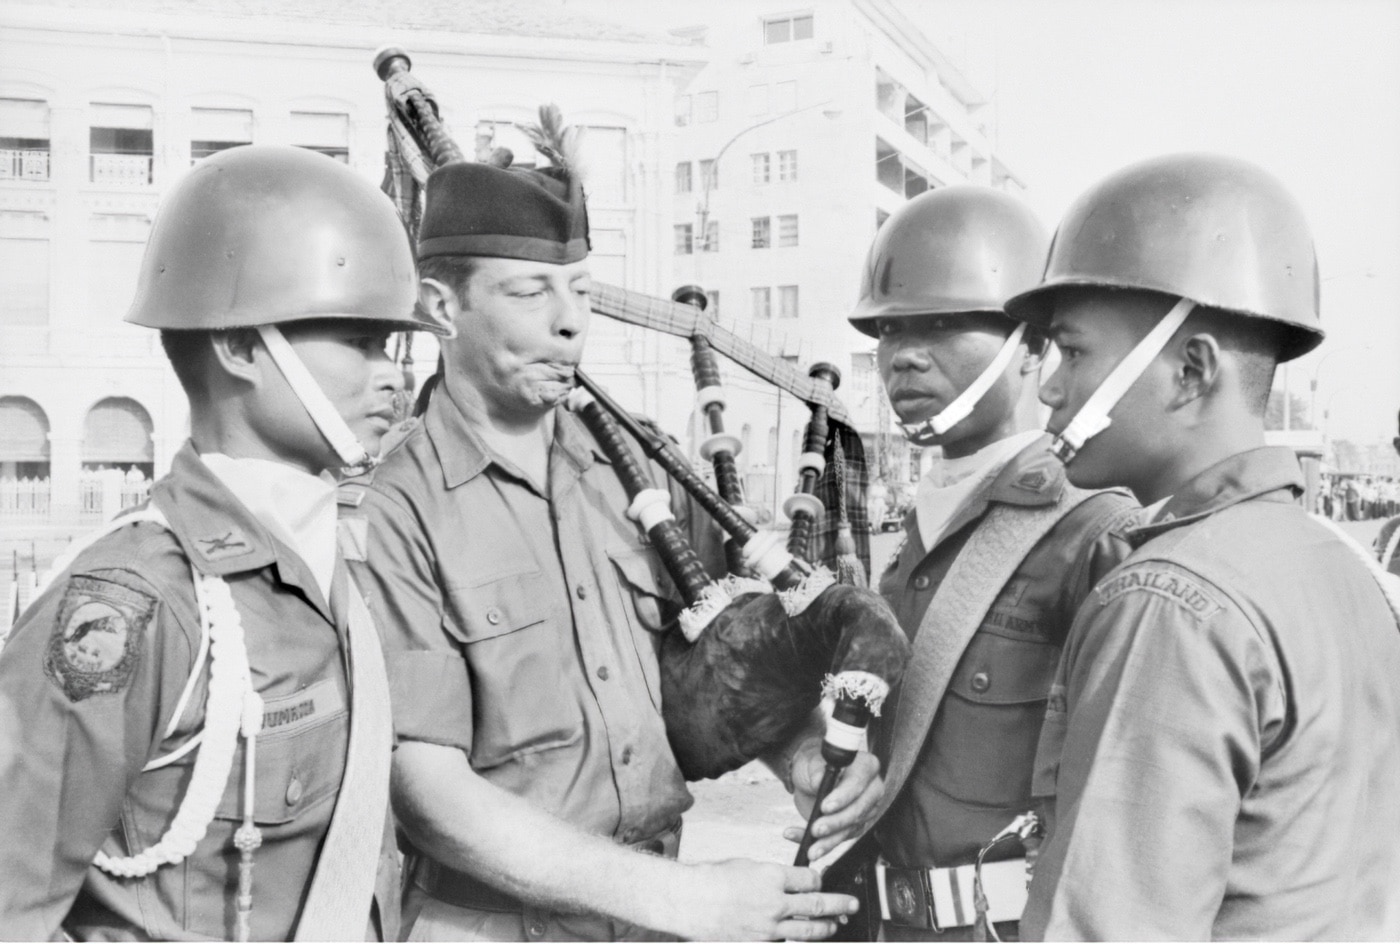 In this unusual photo, Pipe Major (Sergeant) Jack Elliott of the Royal Australian Regiment (3RAR) Pipe Band plays the bagpipes for Thai soldiers in Saigon during the Armed Forces Day parade, June 1971. The parade included members of all allied forces in the Vietnam War and is an interesting part of Cold War history.